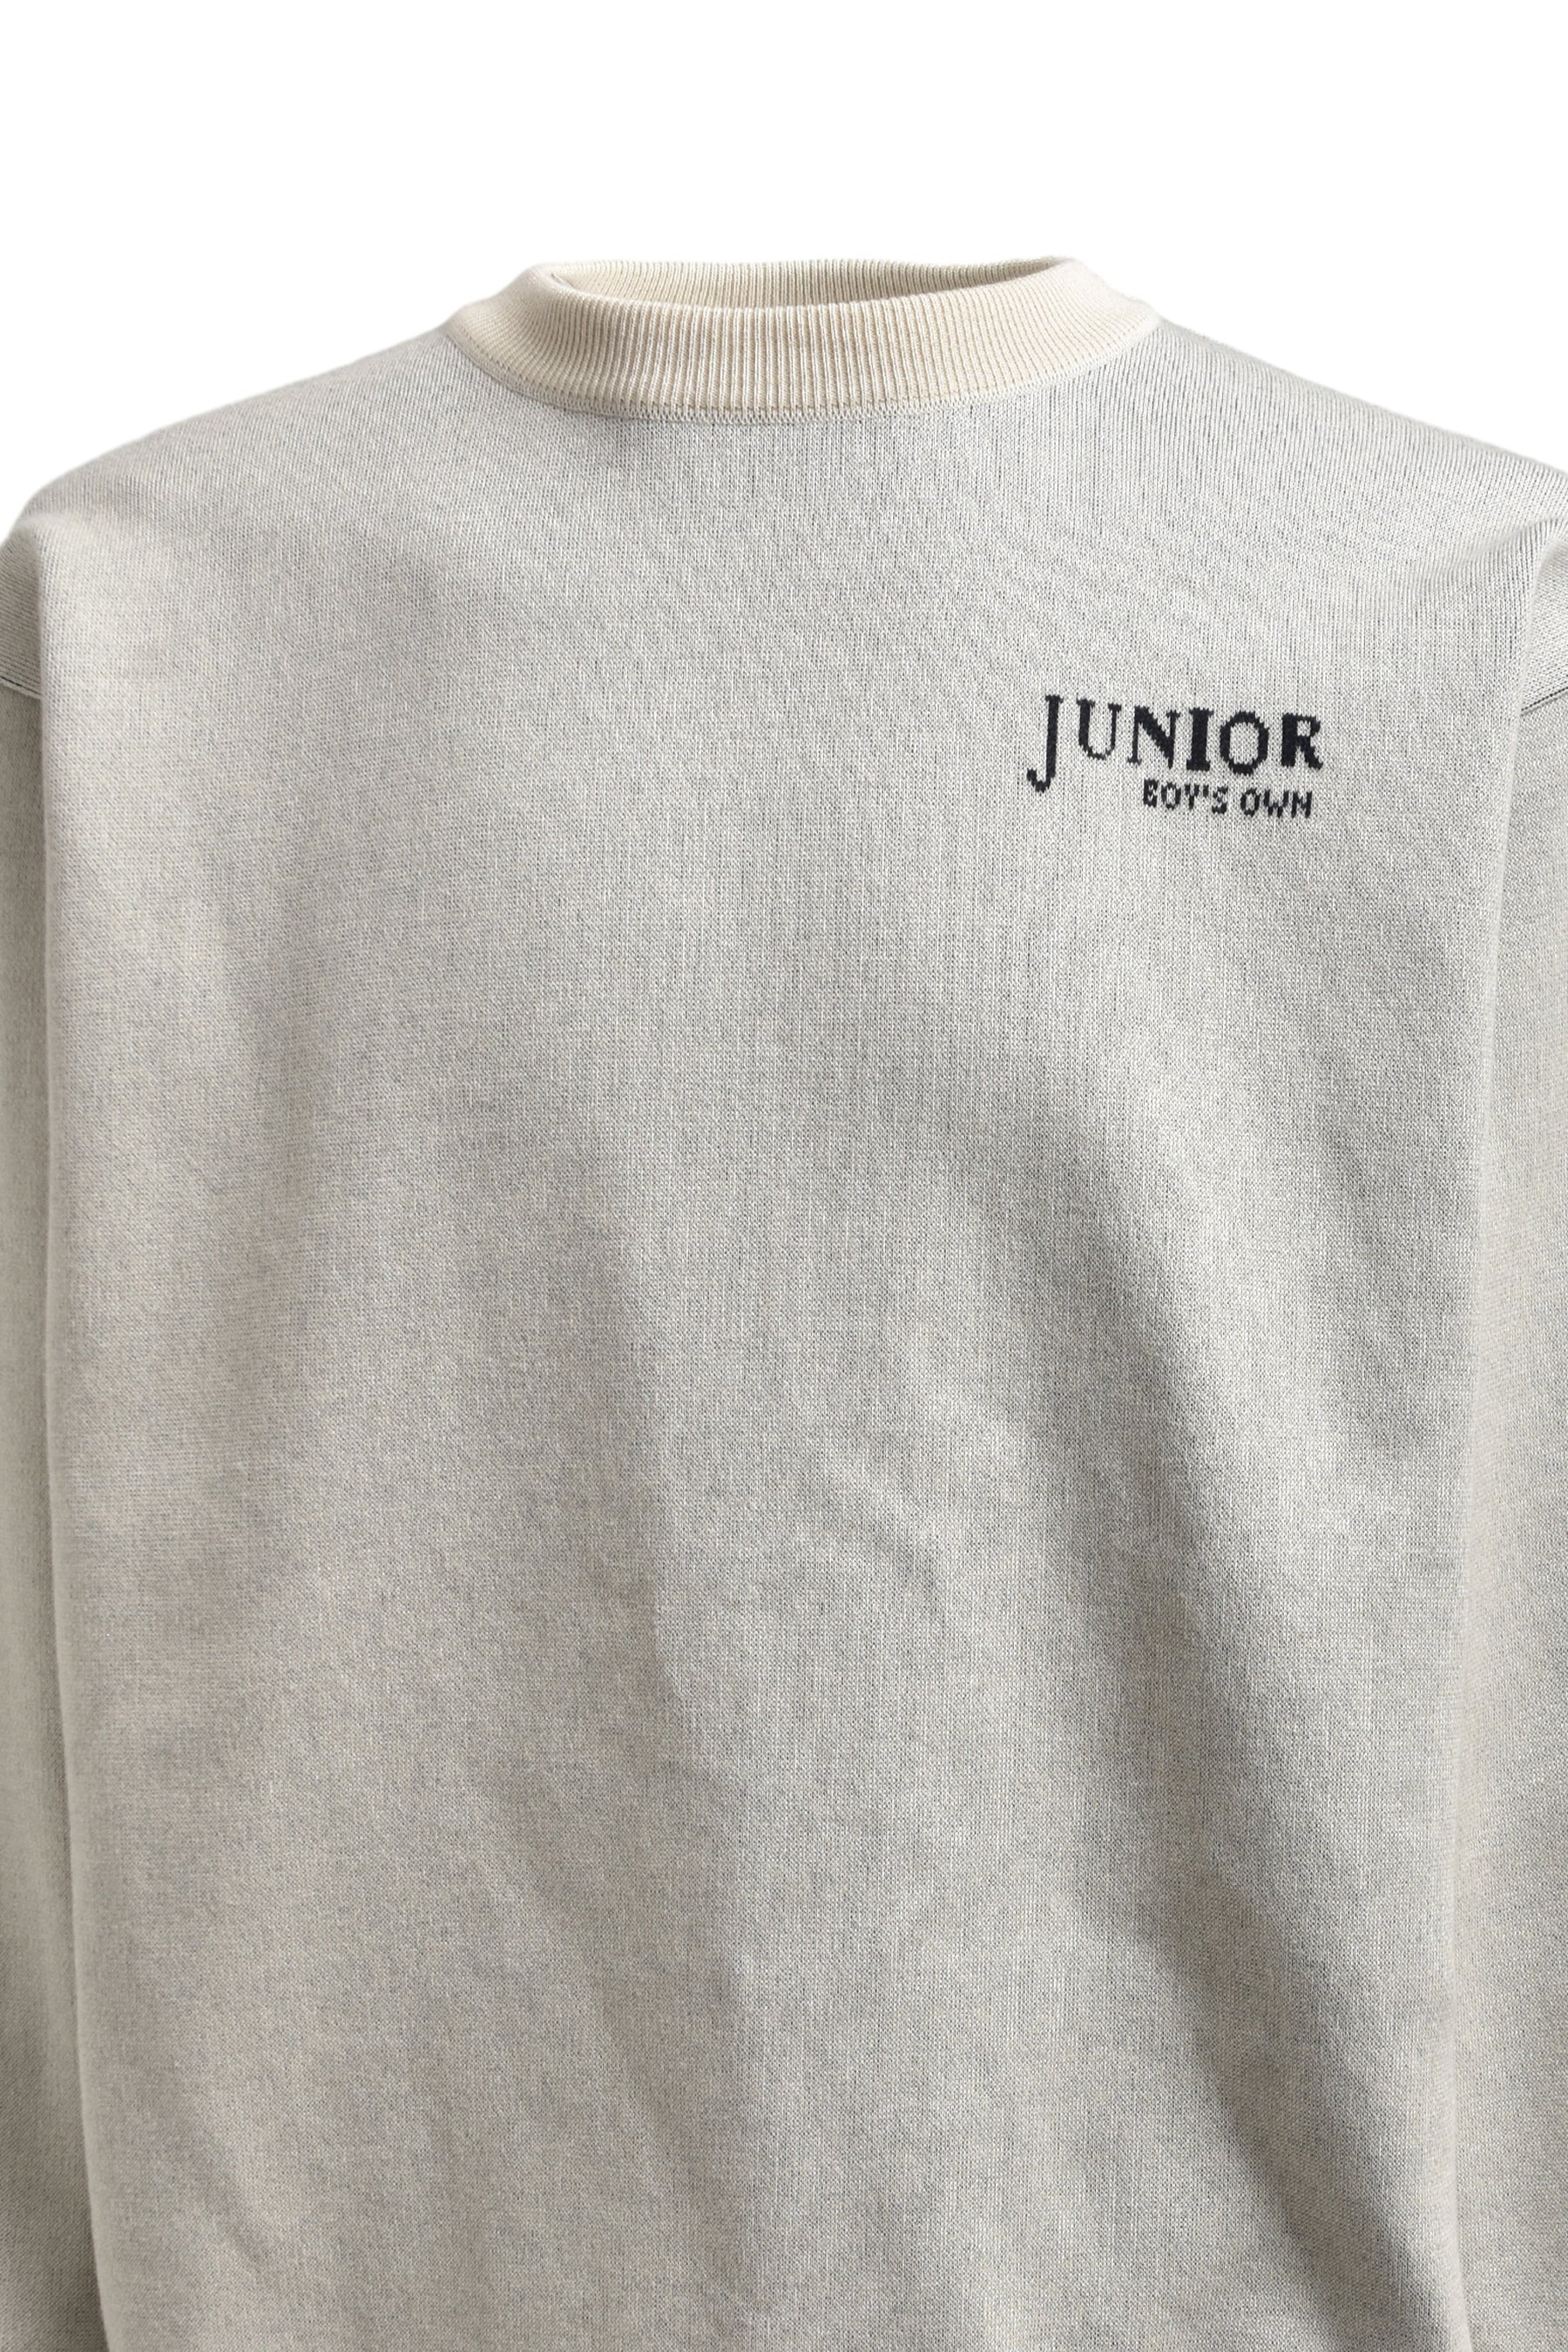 LOGO KNIT PULLOVER BOY'S OWN SP / OFF WHT